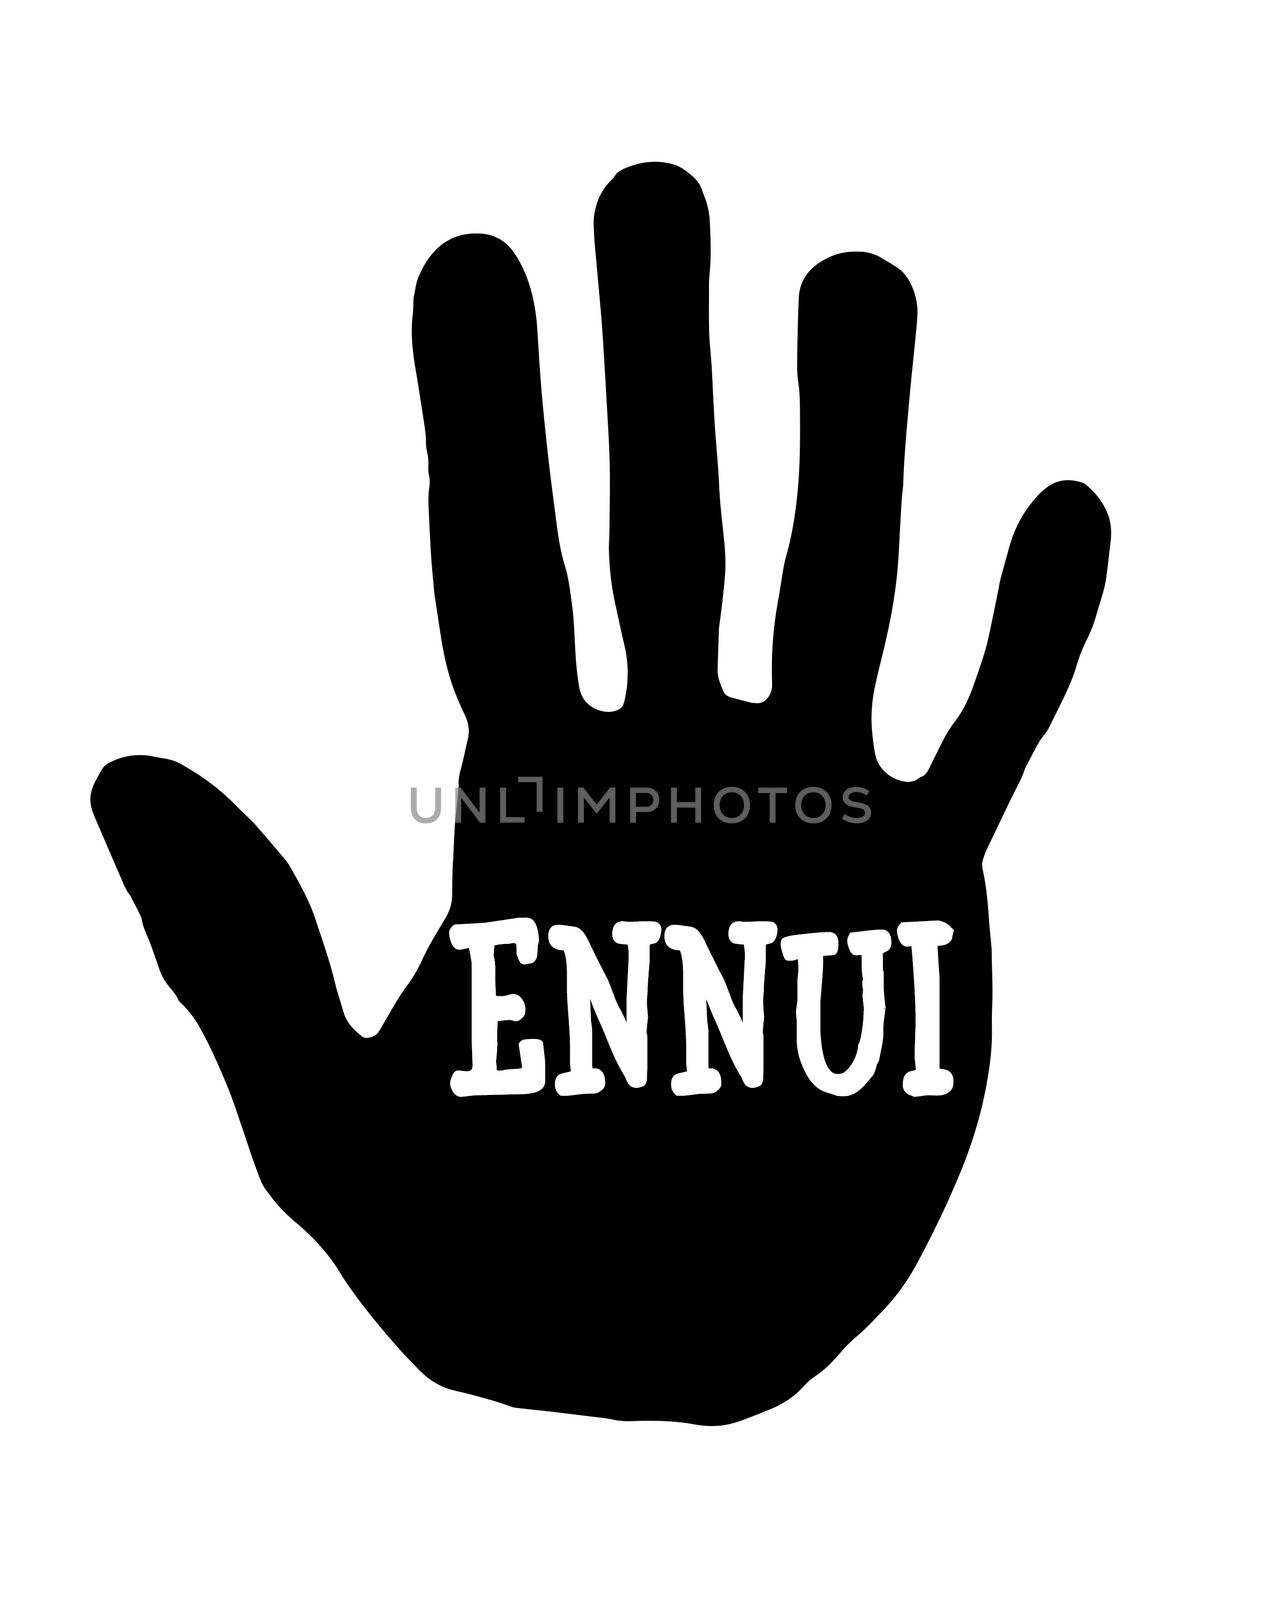 Man handprint isolated on white background showing stop ennui